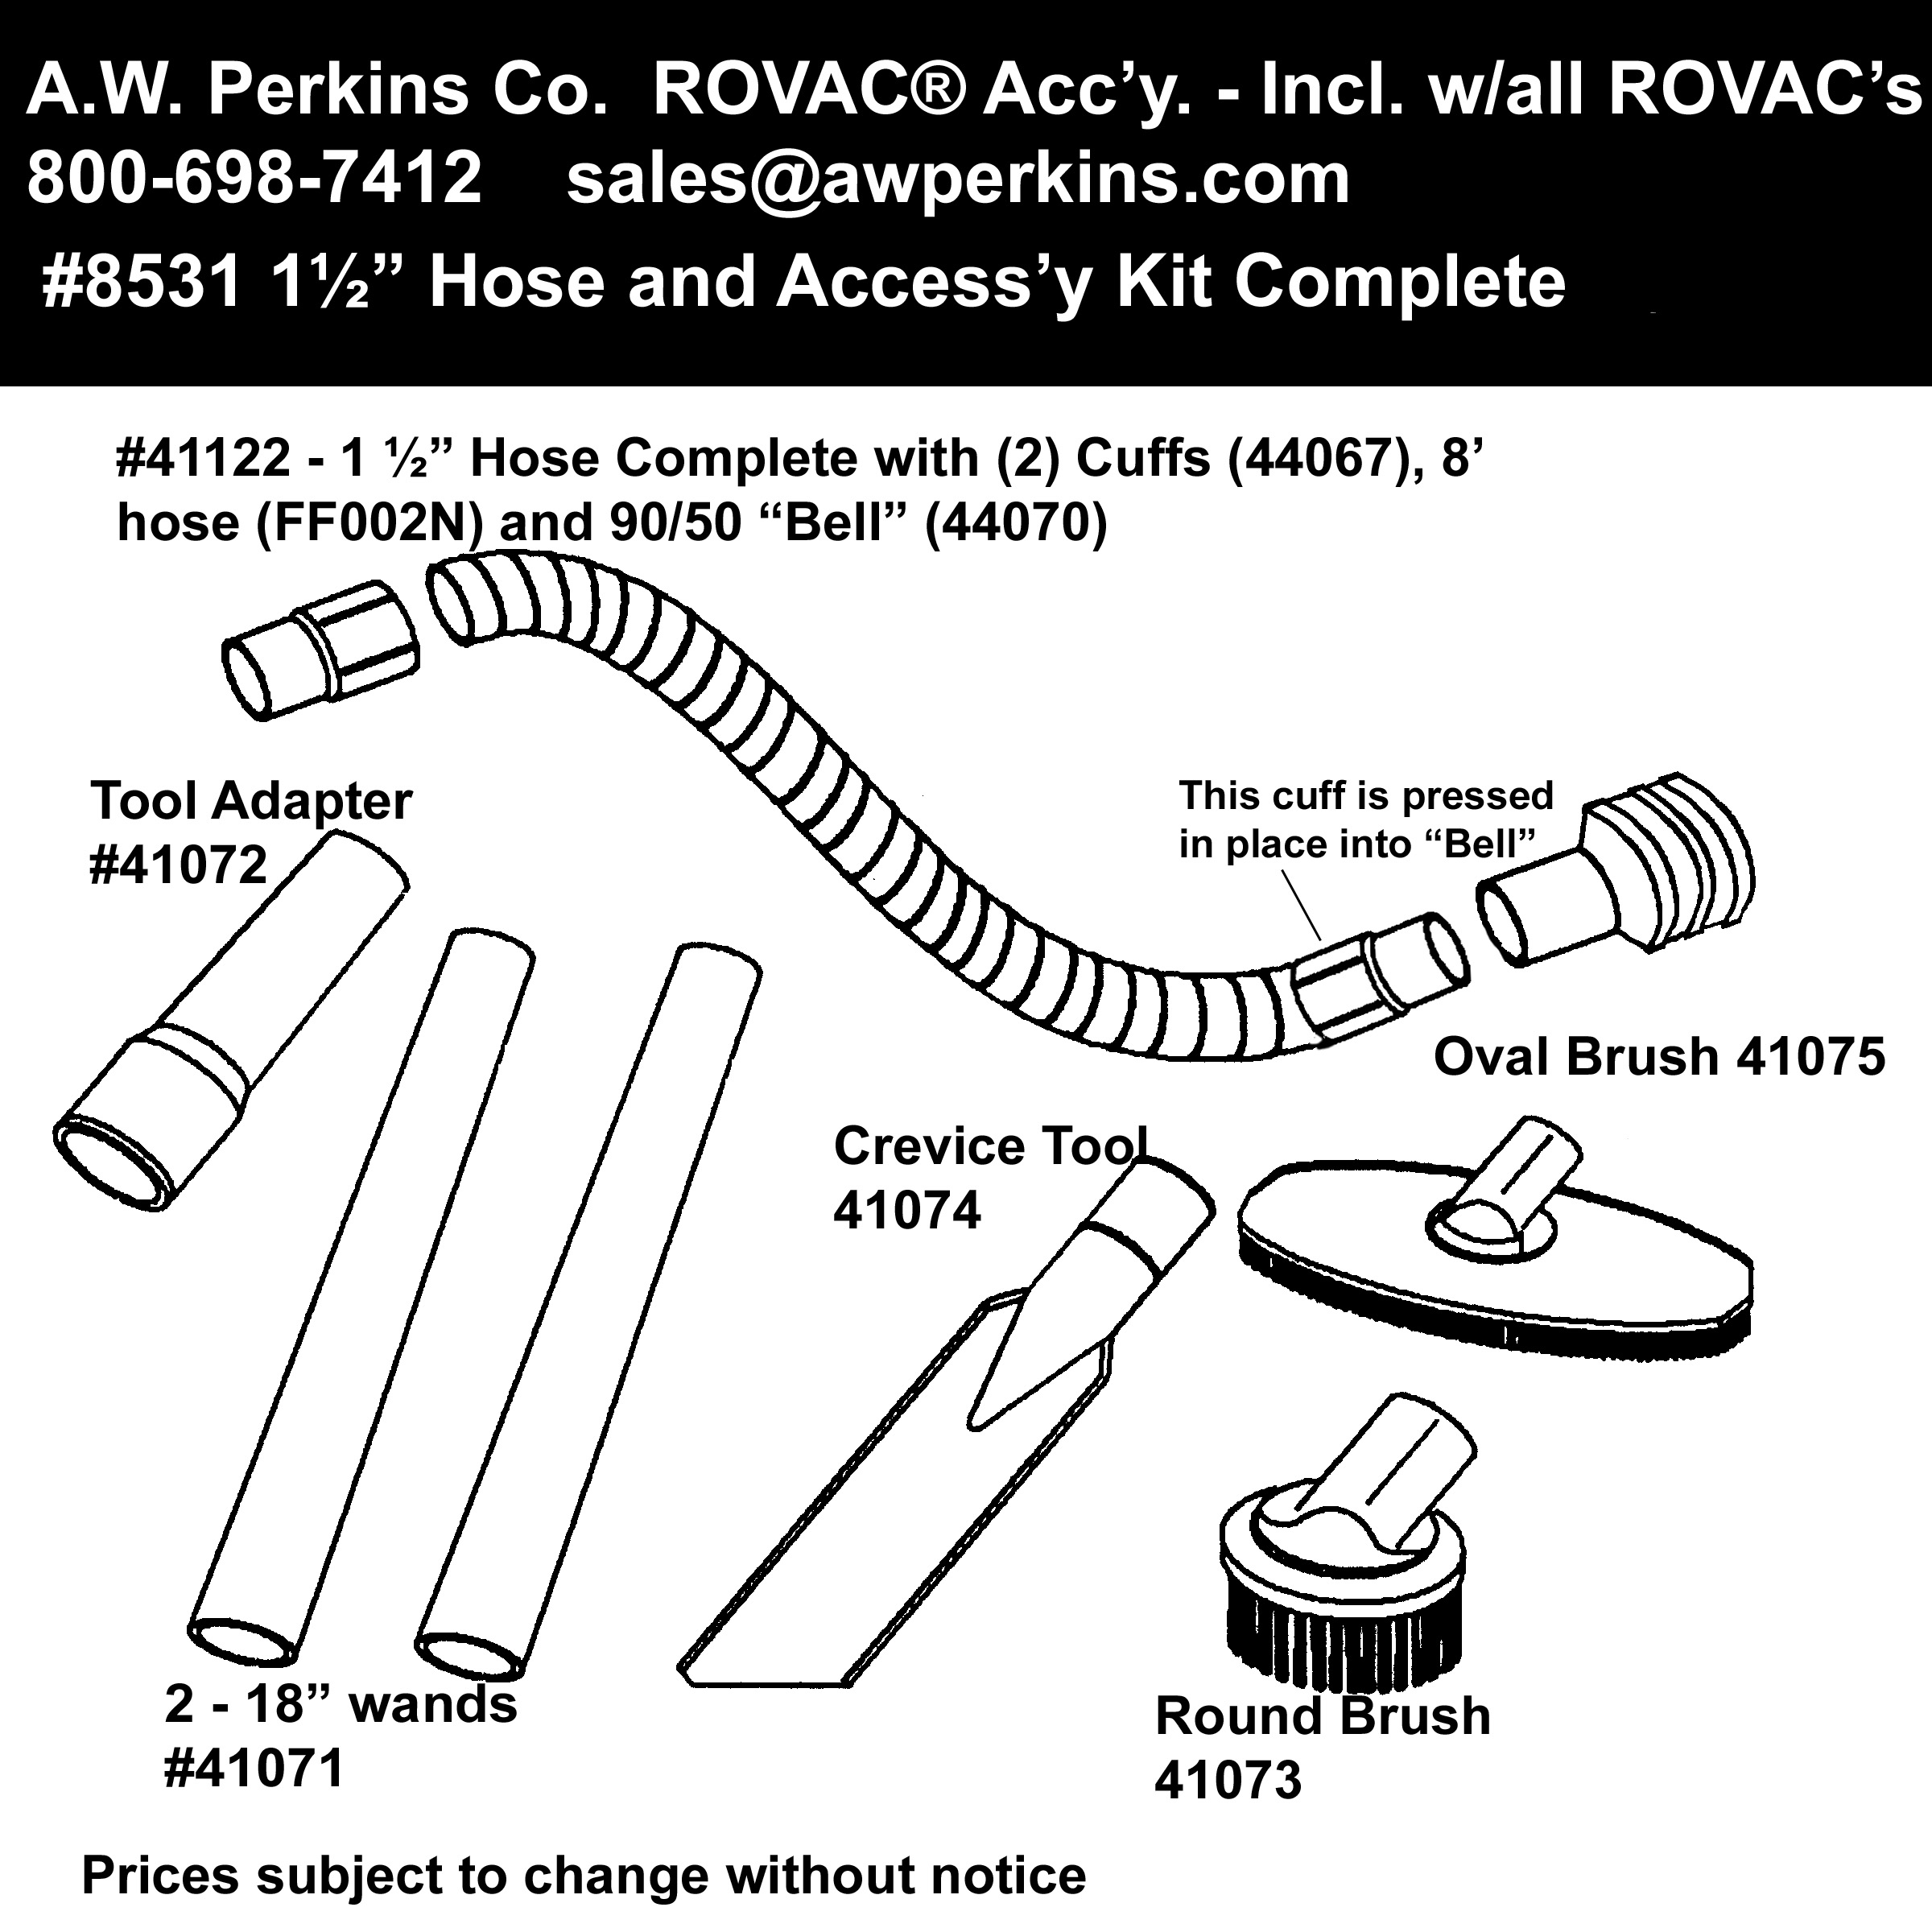 41074 Crevice Tool for Rovac 1.5